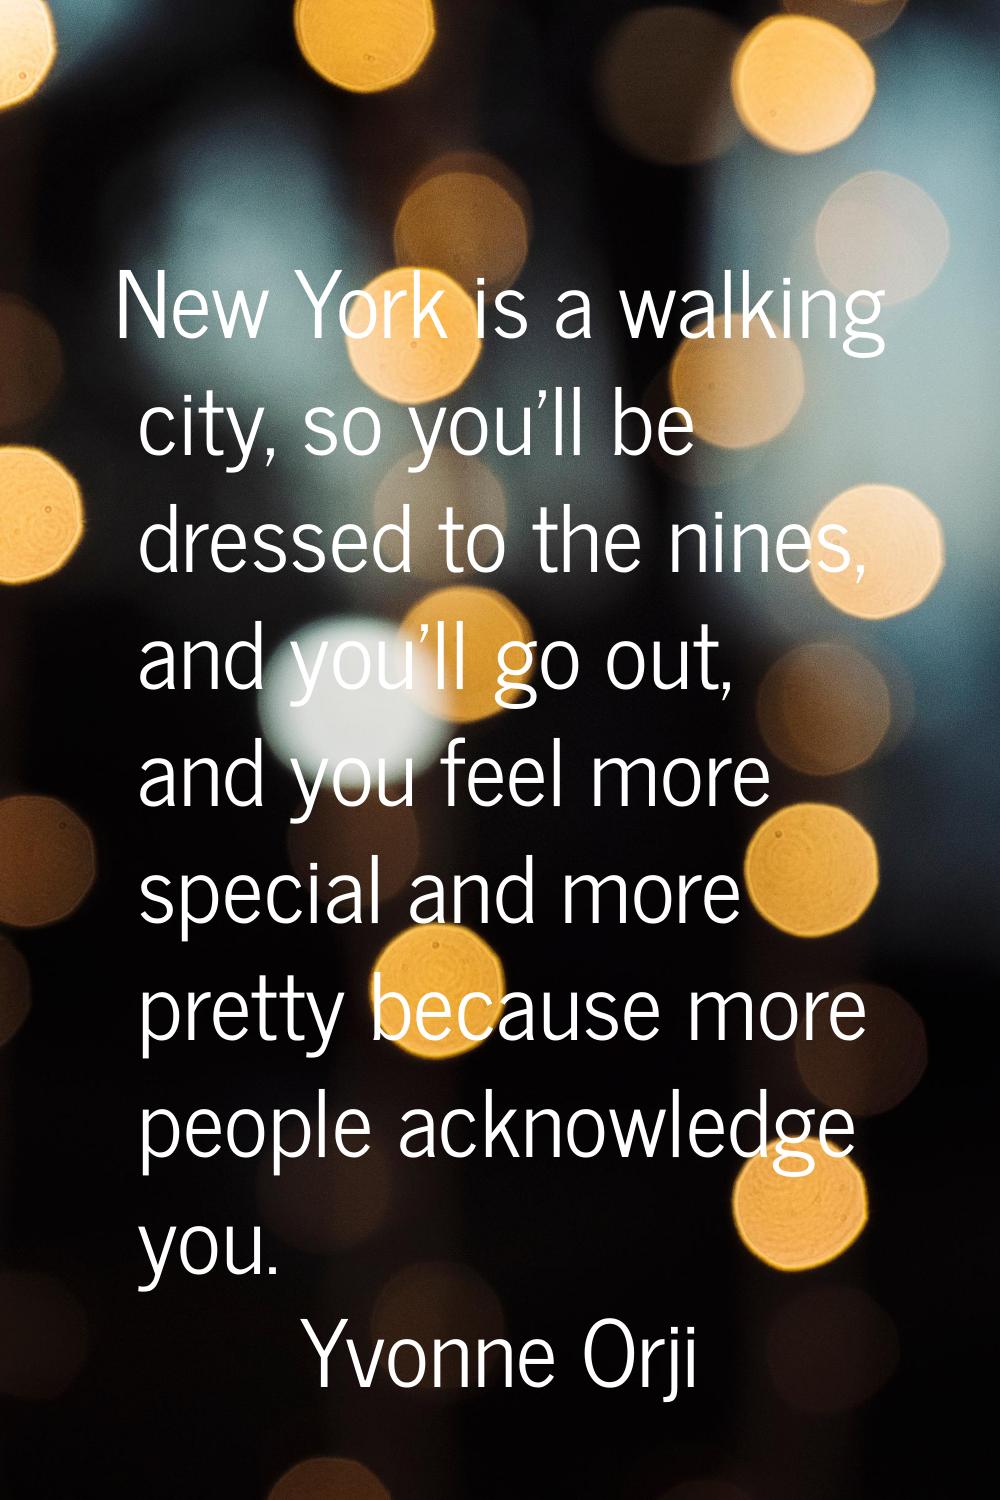 New York is a walking city, so you'll be dressed to the nines, and you'll go out, and you feel more